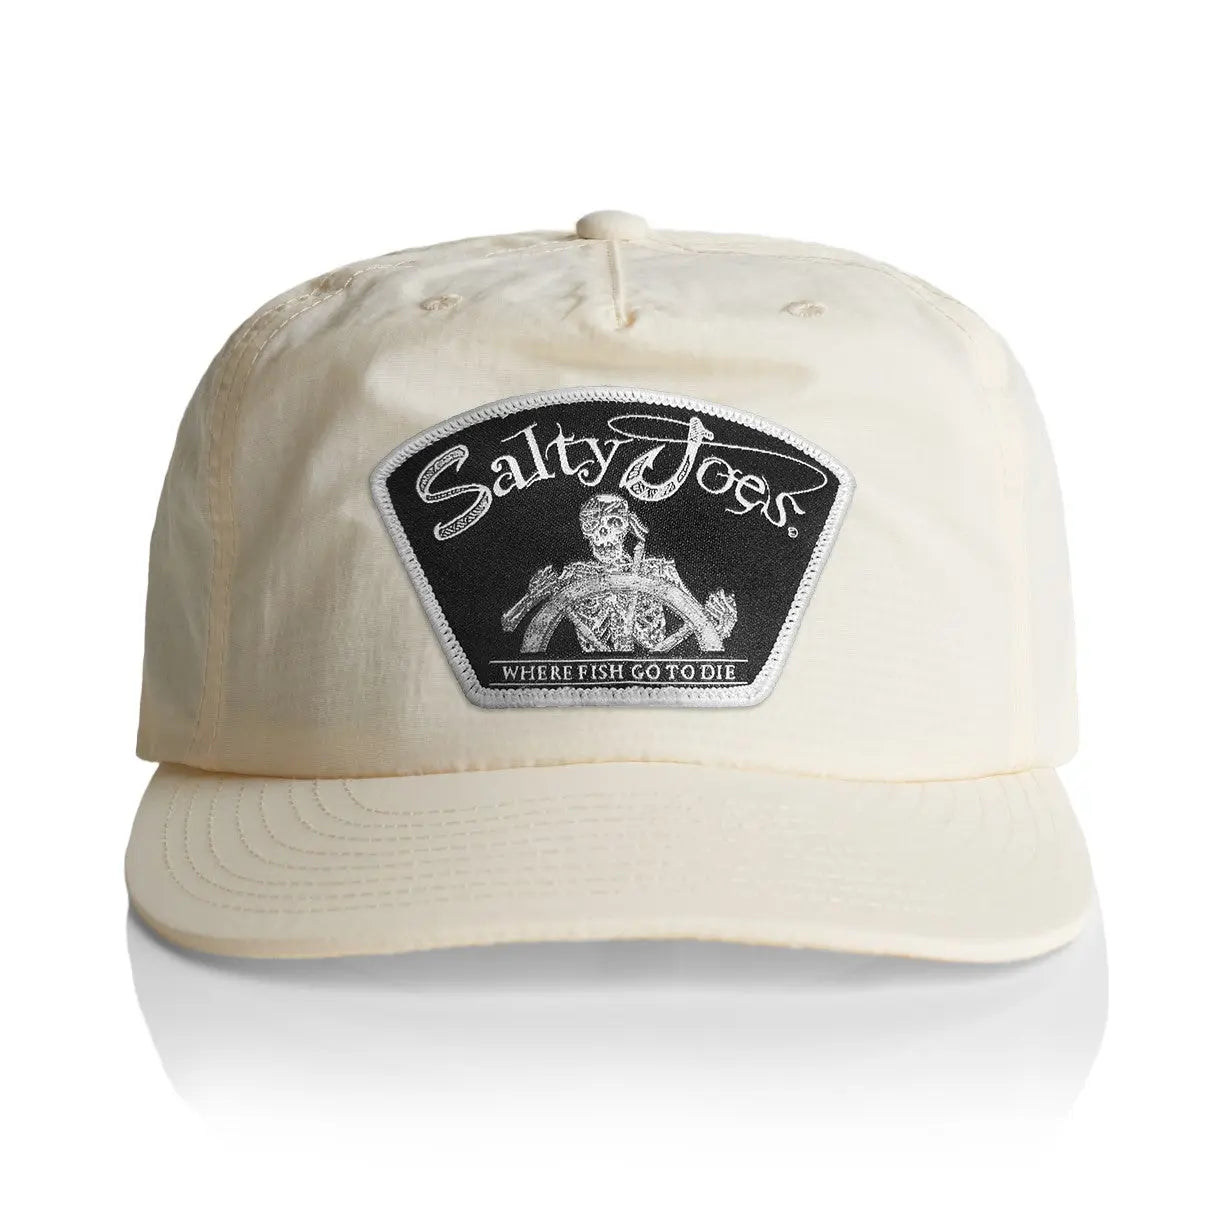 Fishing Hats - Shop Our Wide Variety of Hats Built For Fishing – Salty Joe's